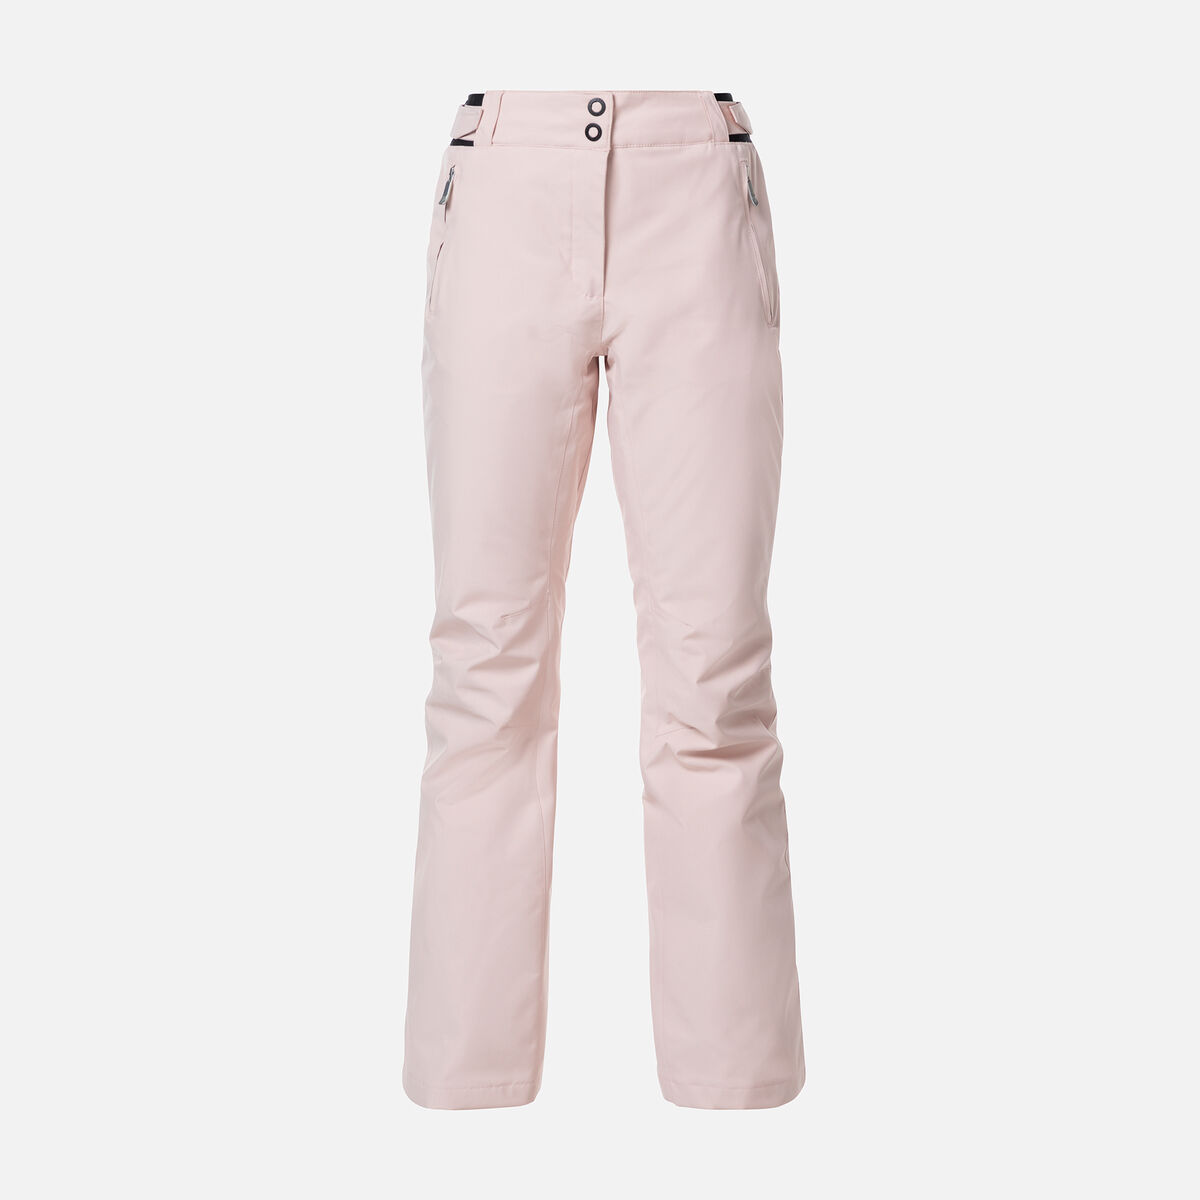 Ski Pants For Women - Polyester - White - Pink - 5 Colors - 3